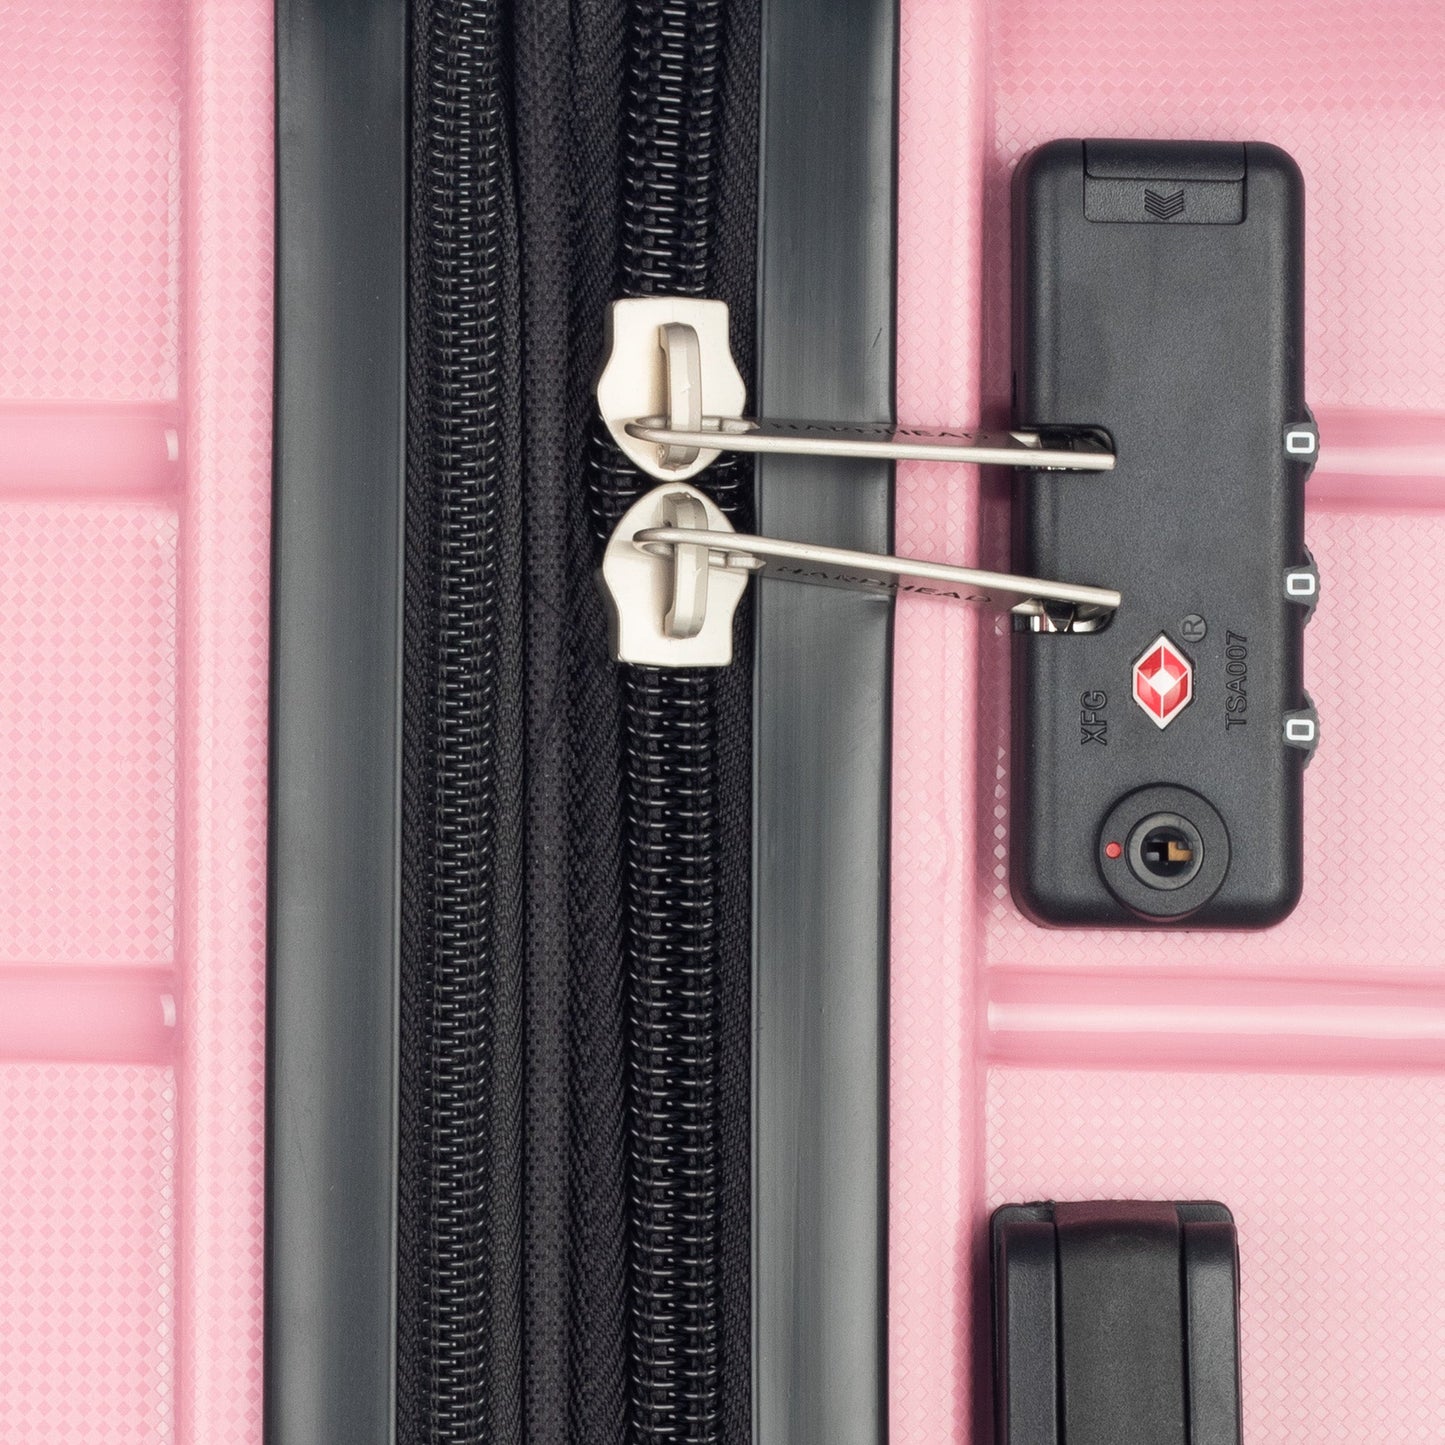 Ian collection luggage pink (18") Suitcase Lock Spinner